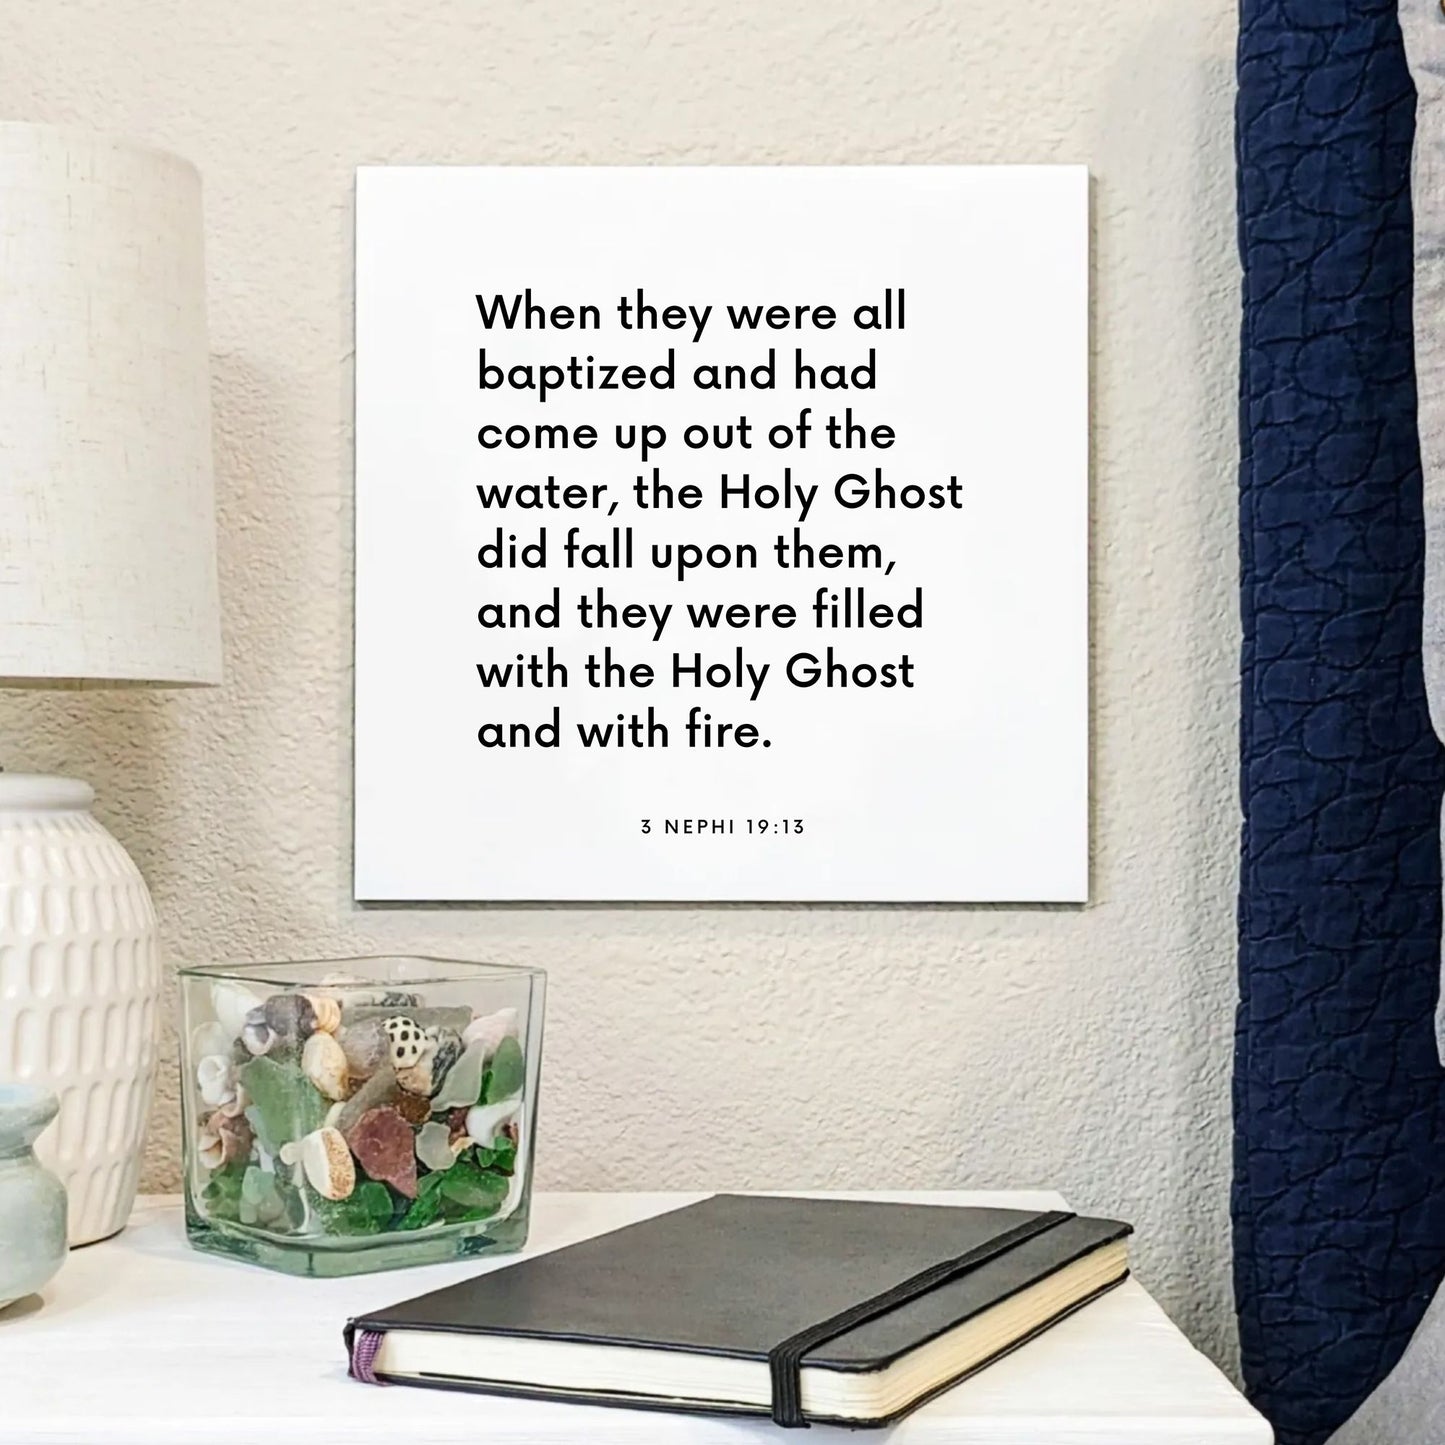 Bedside mouting of the scripture tile for 3 Nephi 19:13 - "They were filled with the Holy Ghost and with fire"